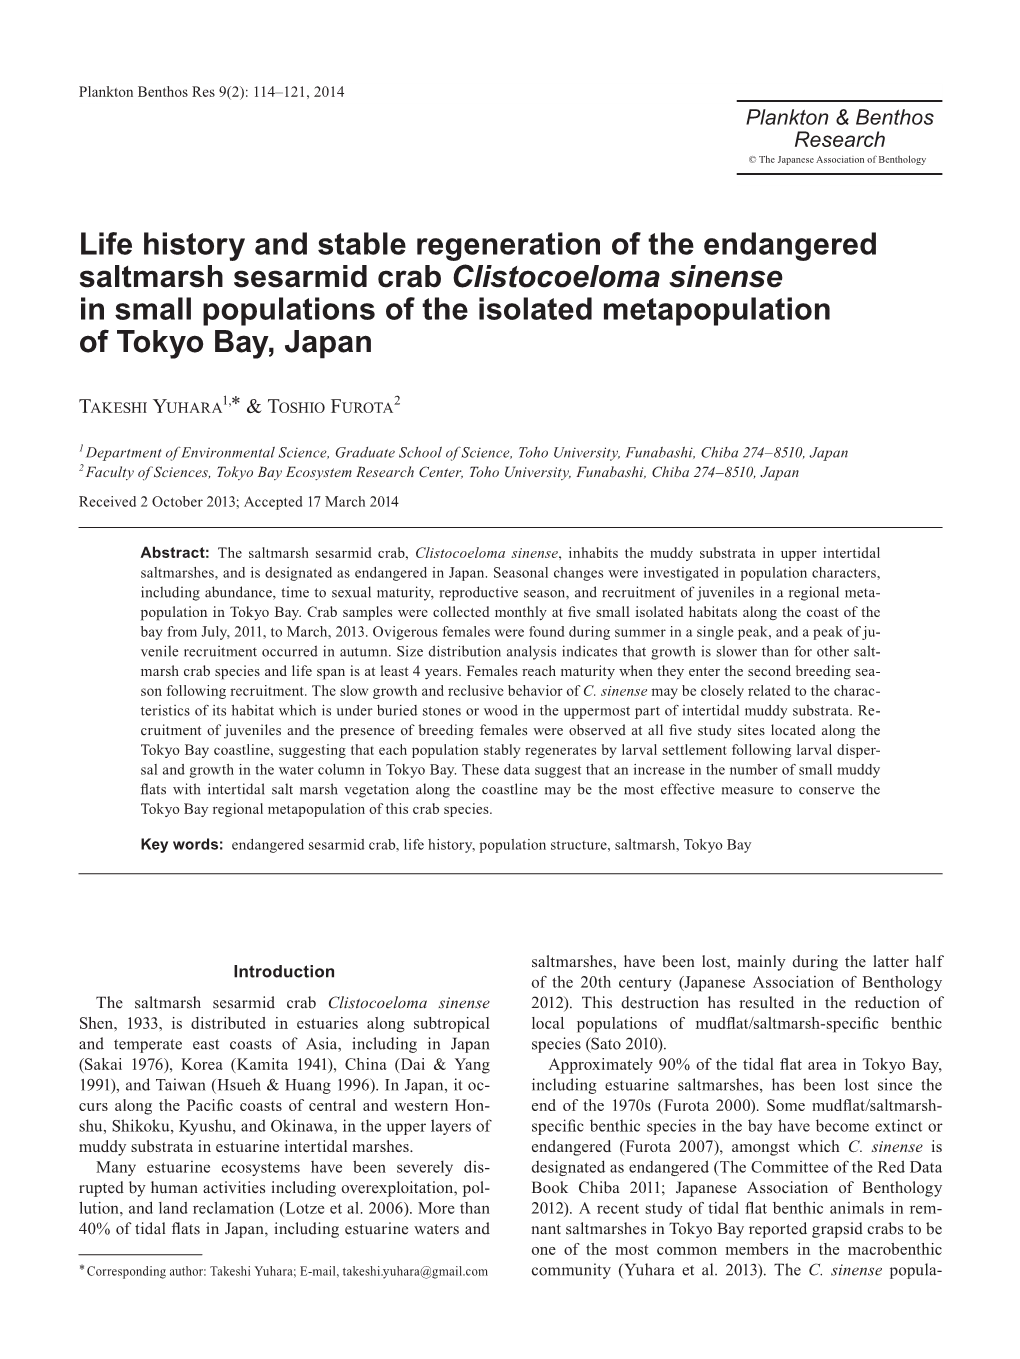 Life History and Stable Regeneration of the Endangered Saltmarsh